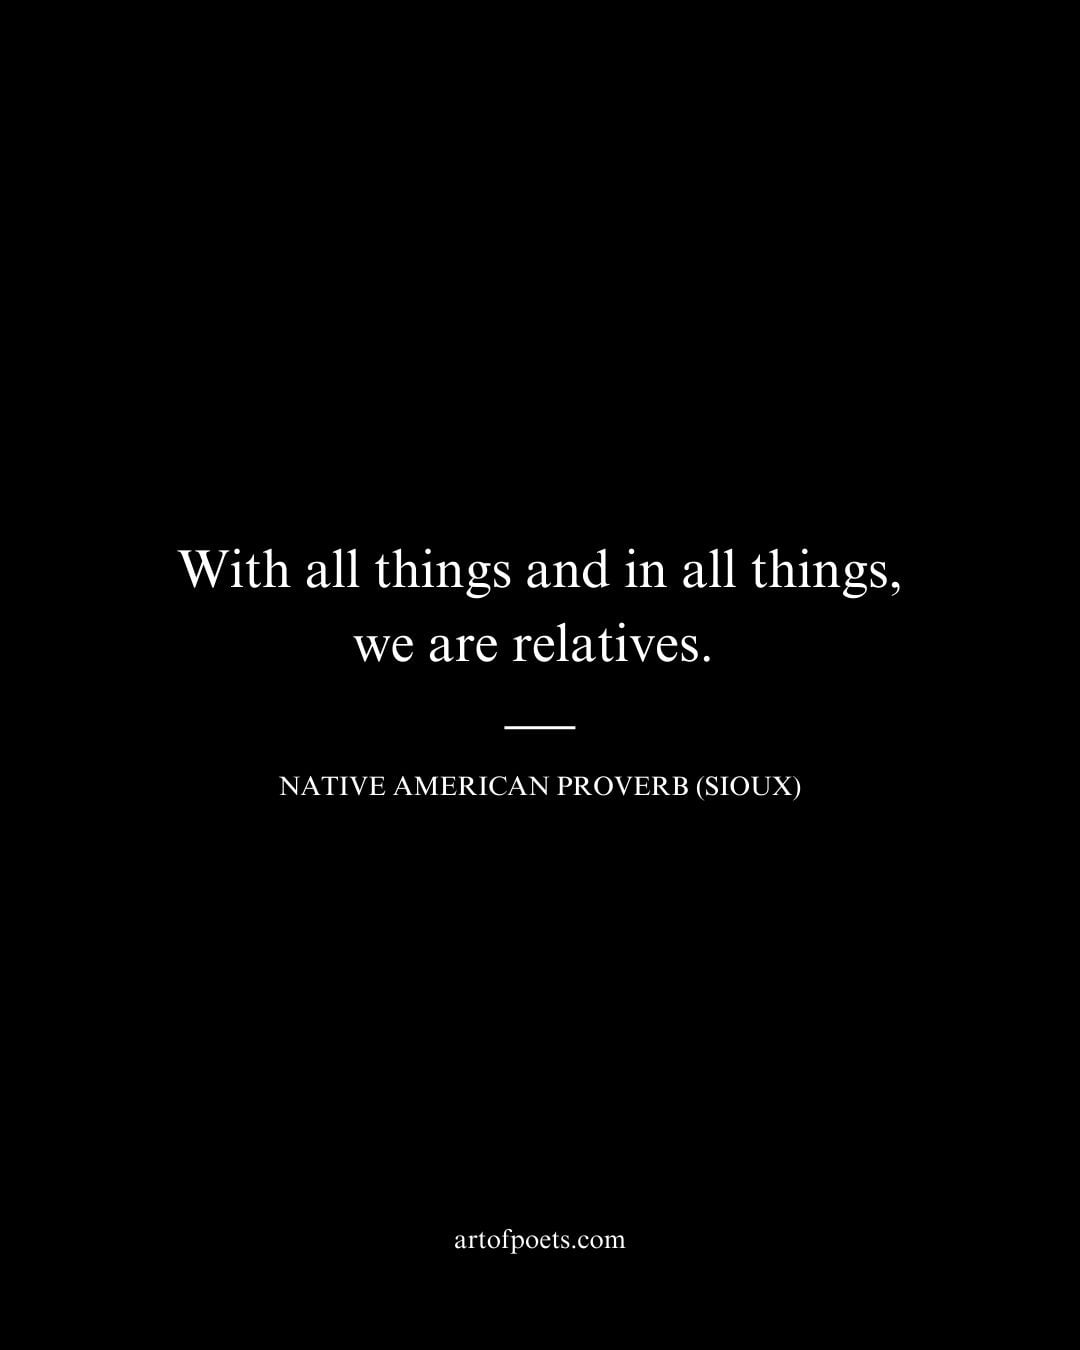 With all things and in all things we are relatives